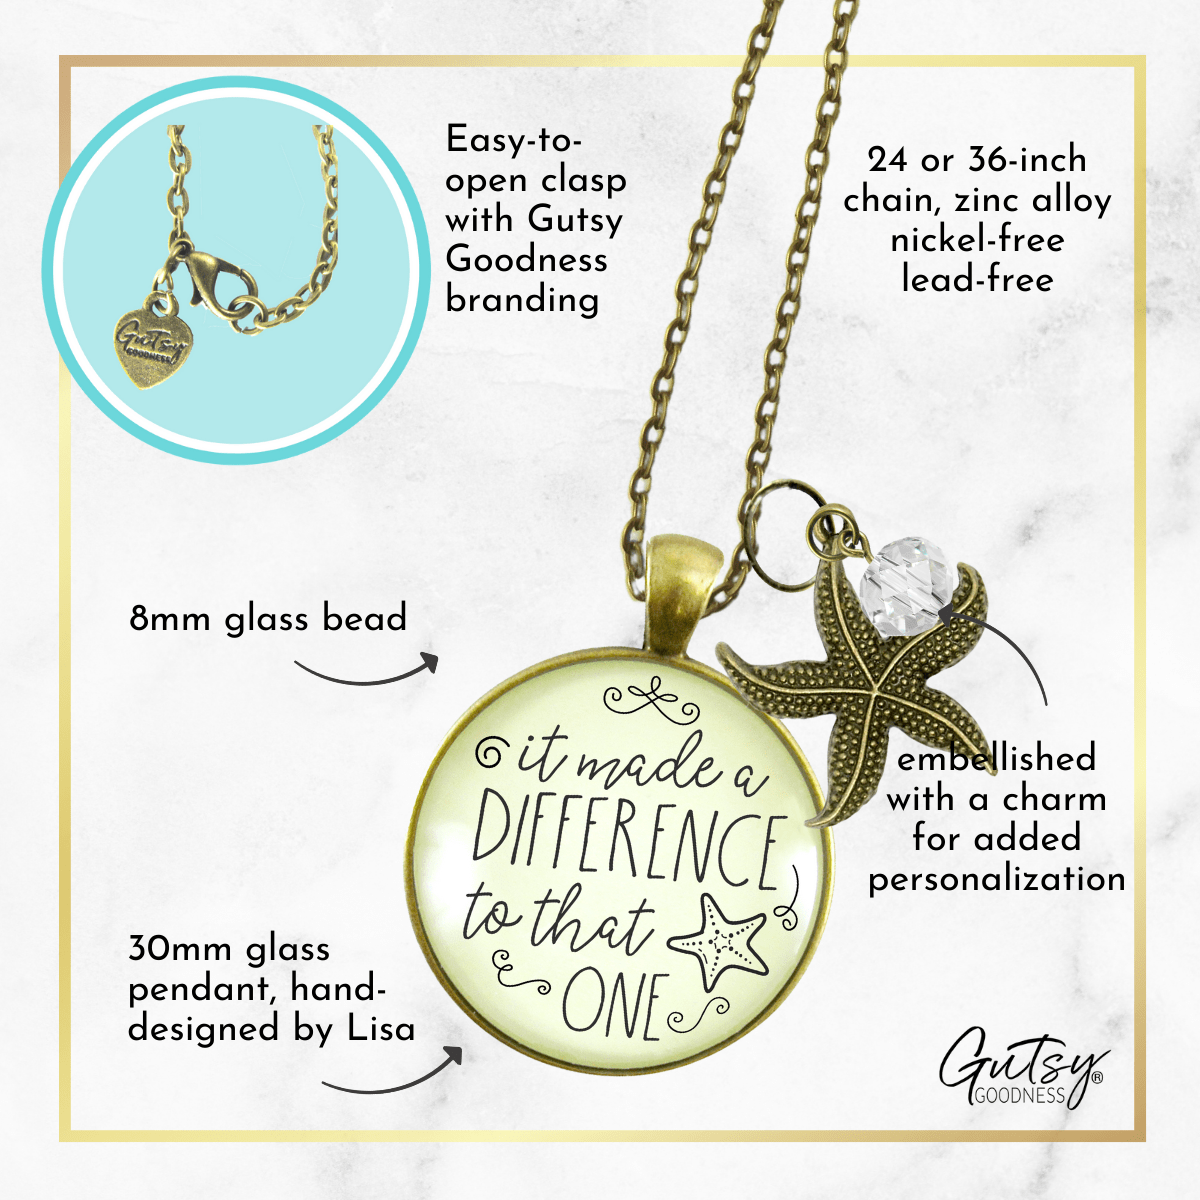 Gutsy Goodness Starfish Necklace Made Difference That One Teacher Story Appreciate Gift Jewelry - Gutsy Goodness Handmade Jewelry;Starfish Necklace Made Difference That One Teacher Story Appreciate Gift Jewelry - Gutsy Goodness Handmade Jewelry Gifts